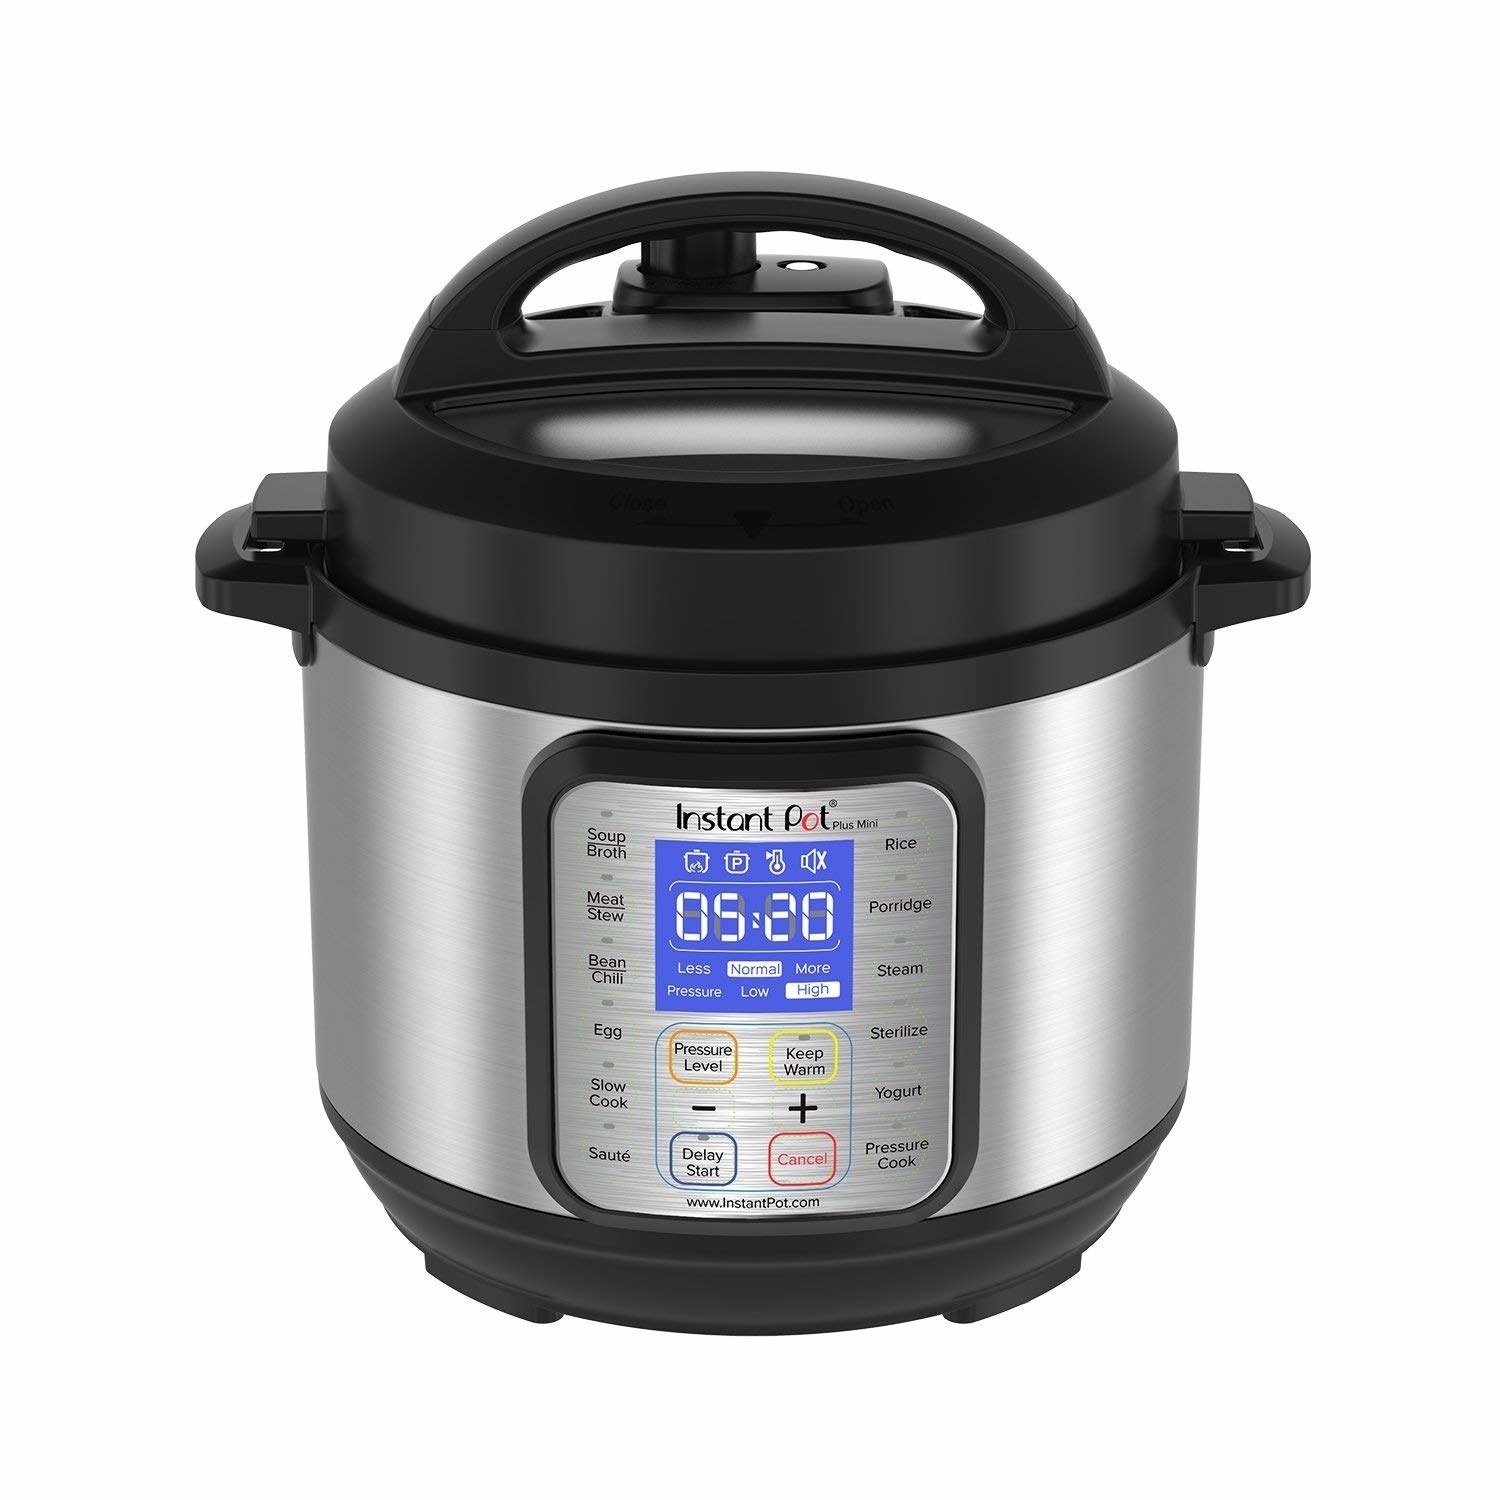 The Instant Pot replaces the biggest and bulkiest of kitchen appliances lik...